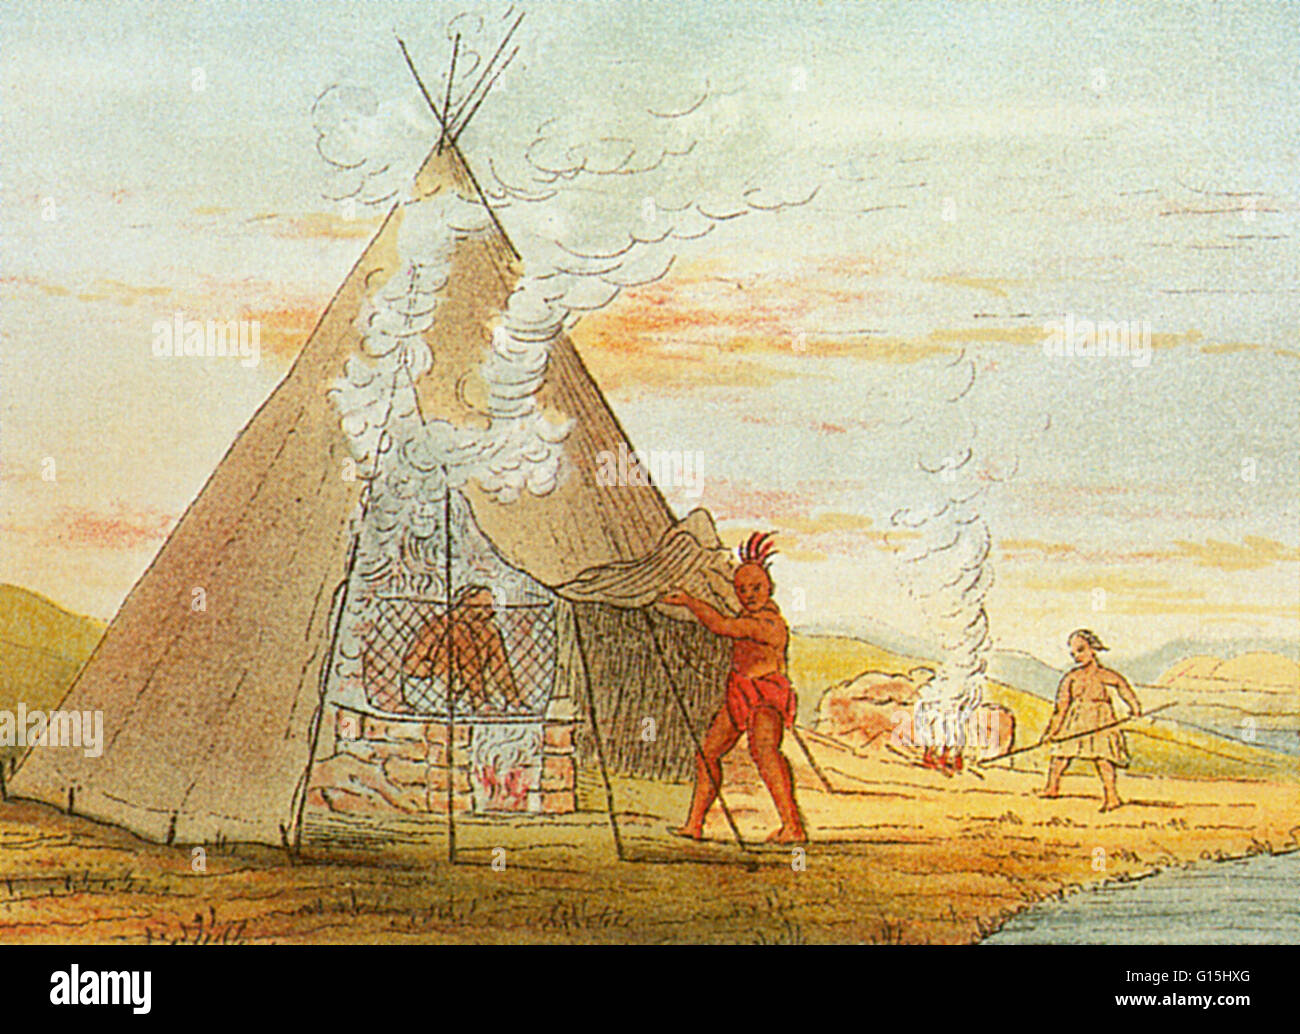 Native Americans used 'sweat-houses' like this one to rid their bodies of toxins when they were ill. The sweat lodge (also called purification ceremony, sweat house, medicine lodge, medicine house, or sweat) is a ceremonial sauna and is an important event Stock Photo